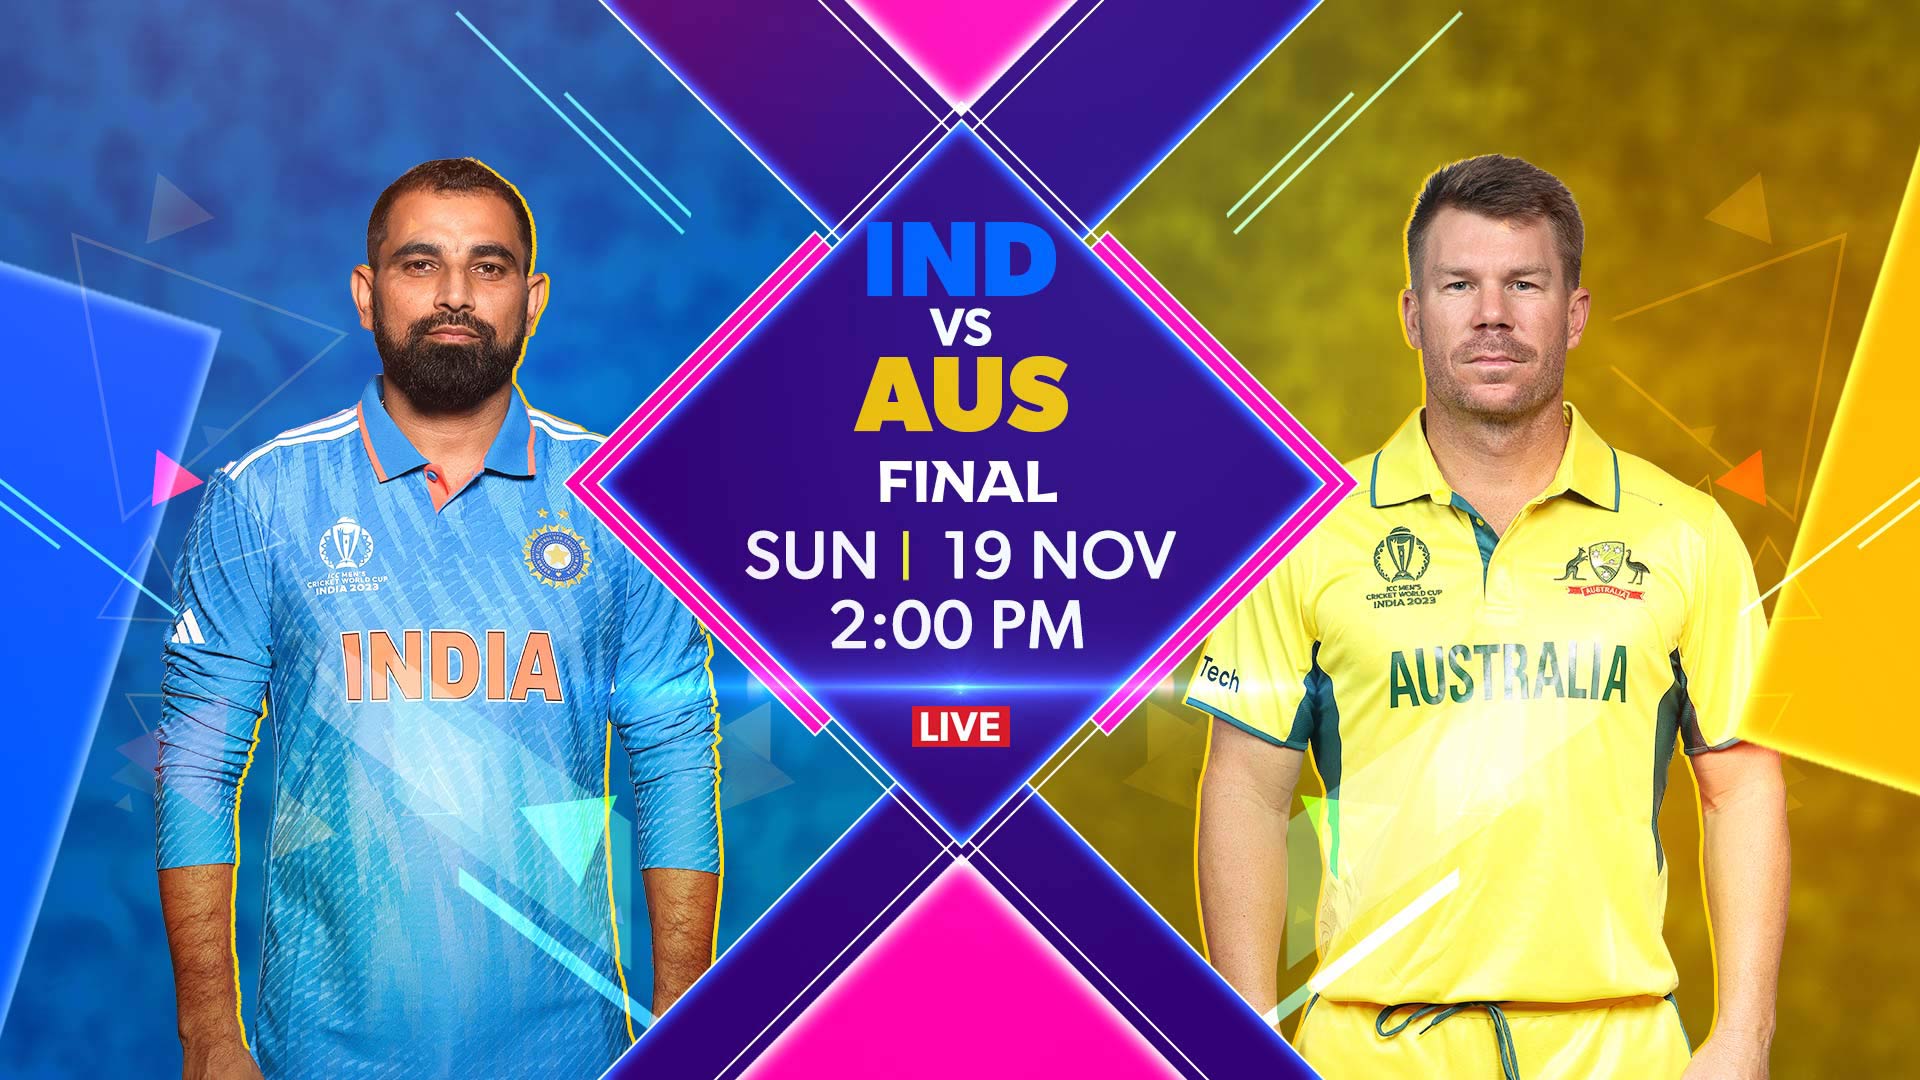 ICC CWC Final Preview: IND vs AUS